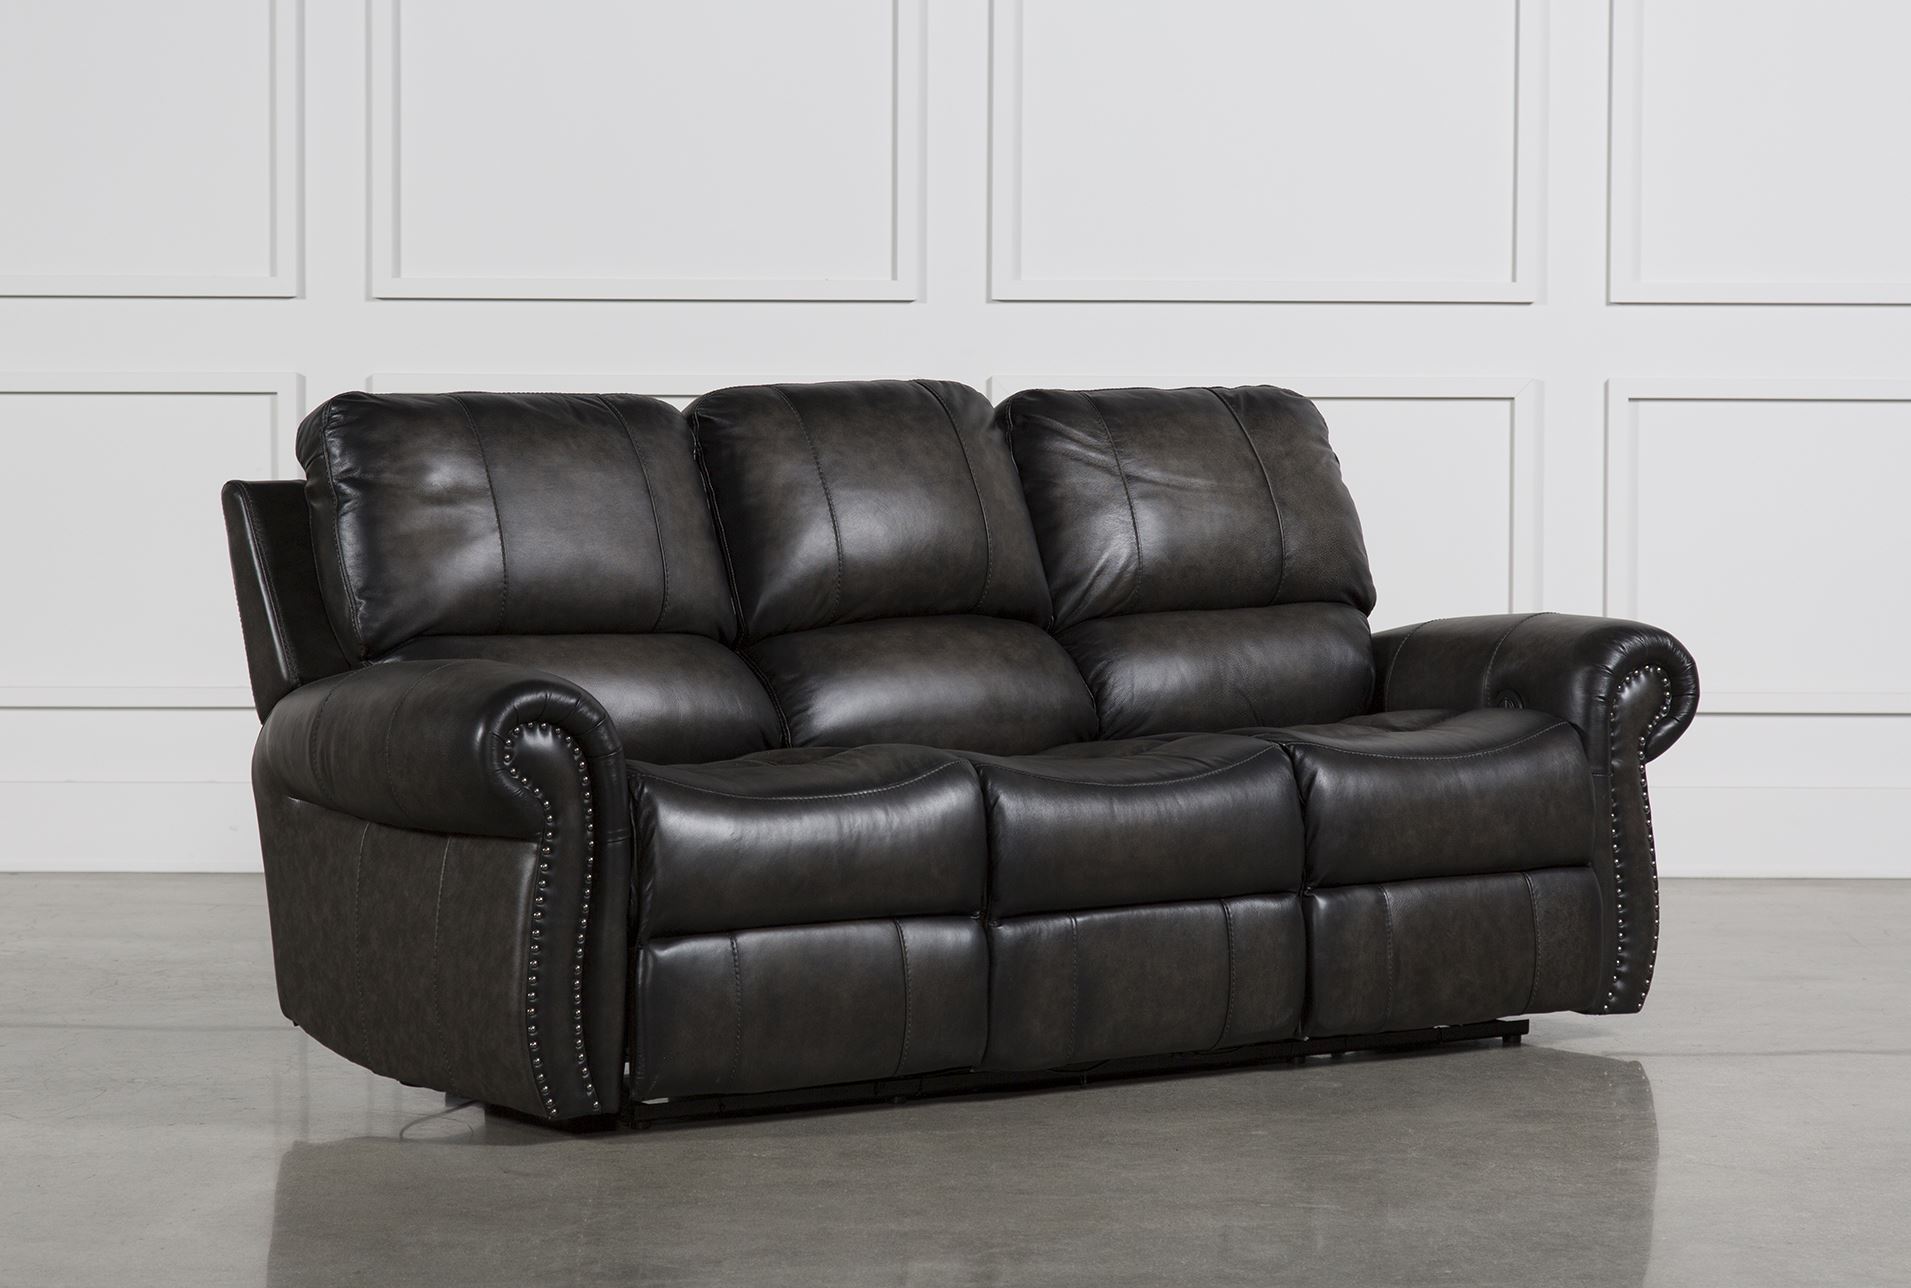 Reclining Sofas for Your Home & fice